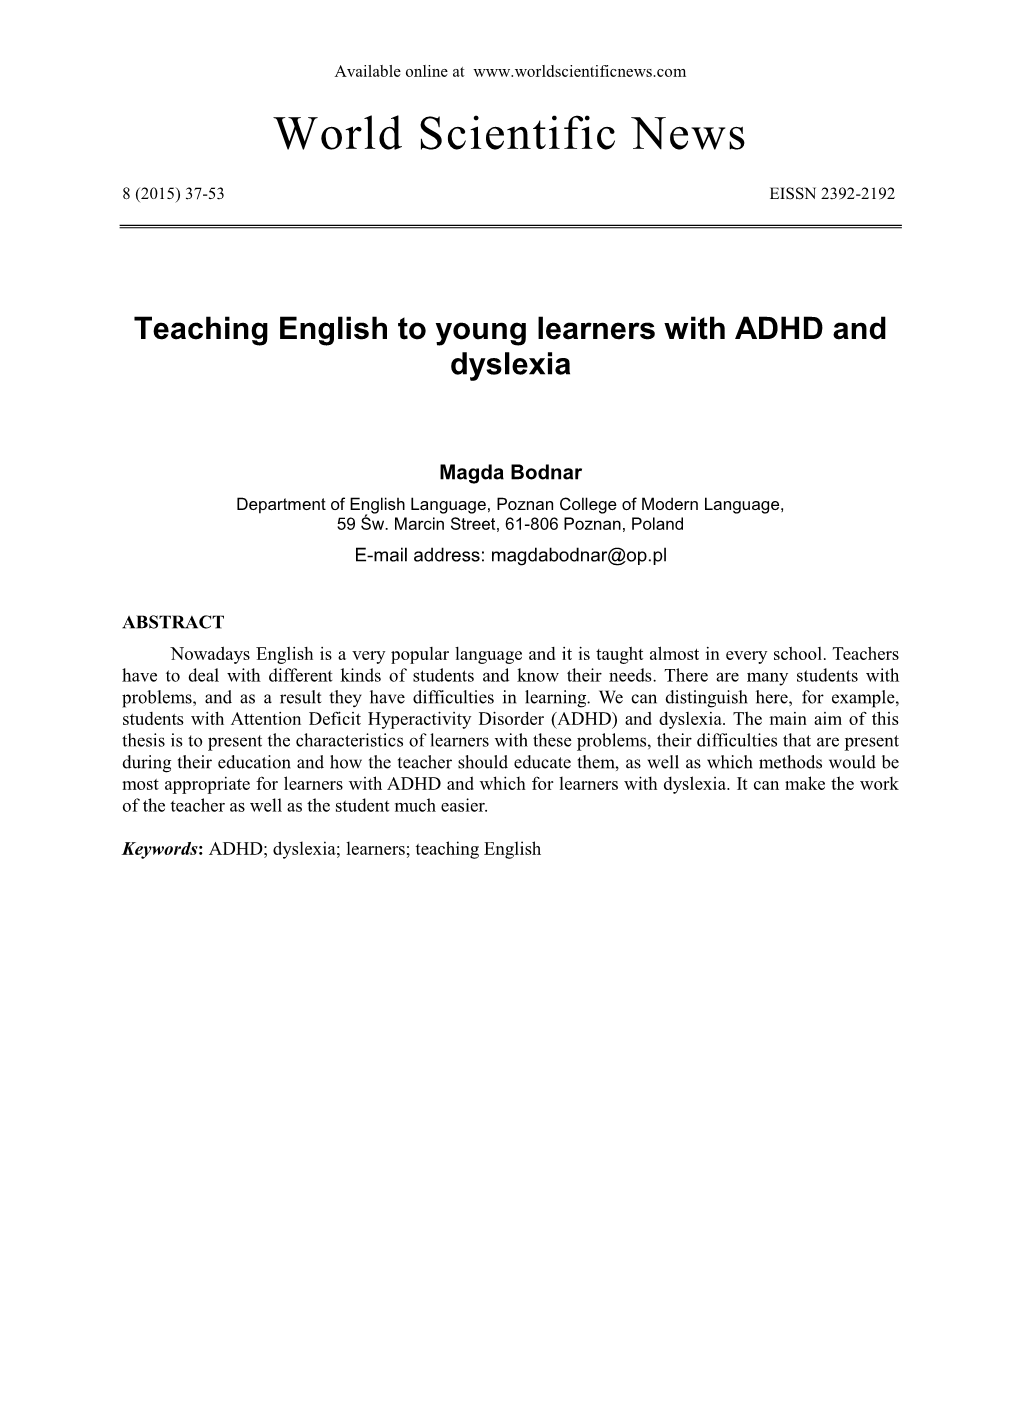 Teaching English to Young Learners with ADHD and Dyslexia